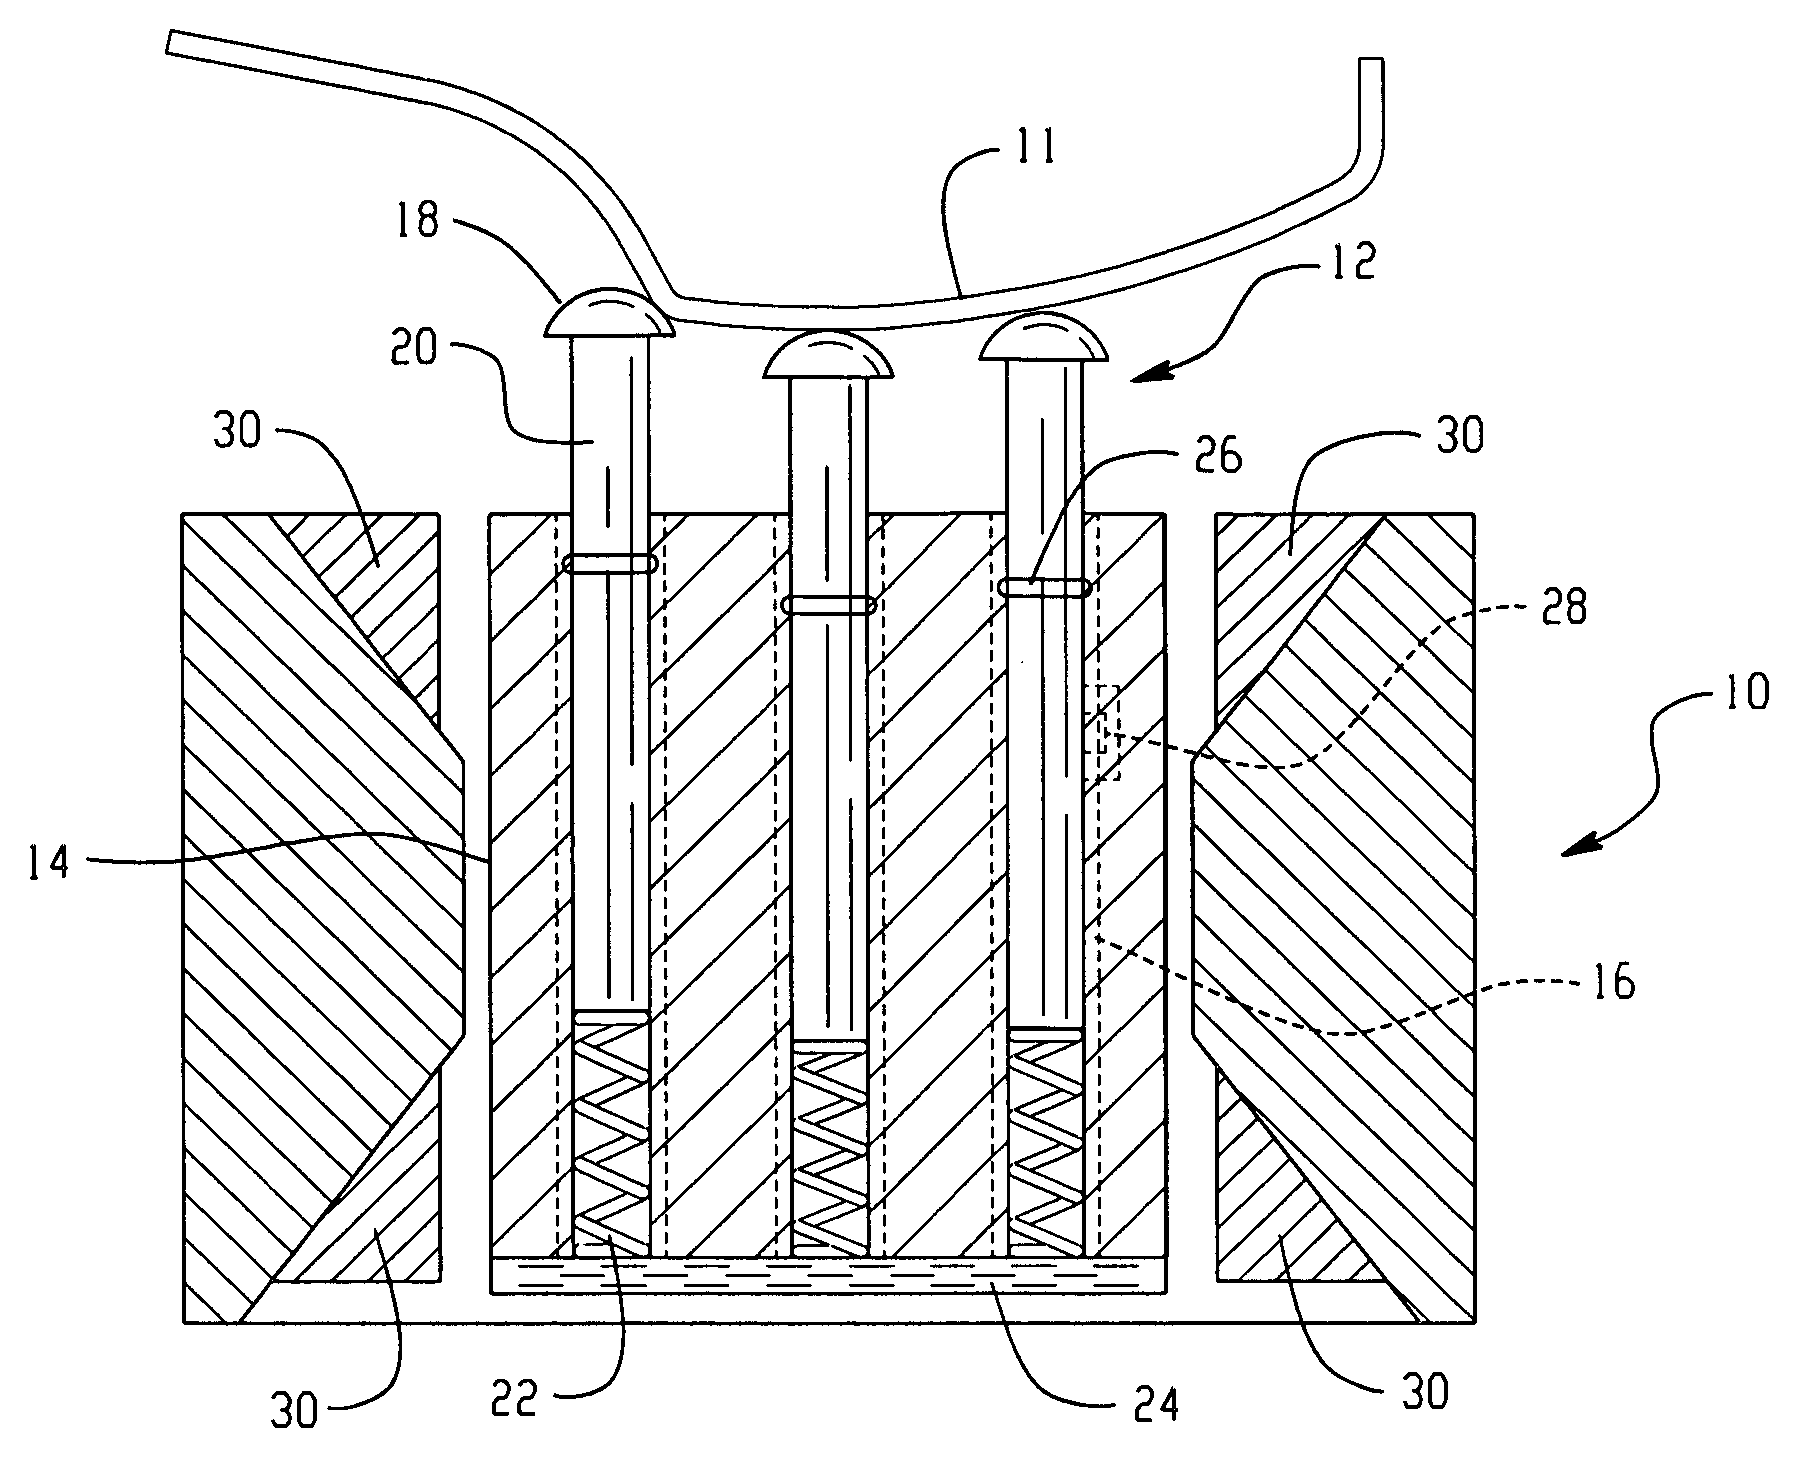 Magnetorheological reconfigurable clamp for a flexible manufacturing system